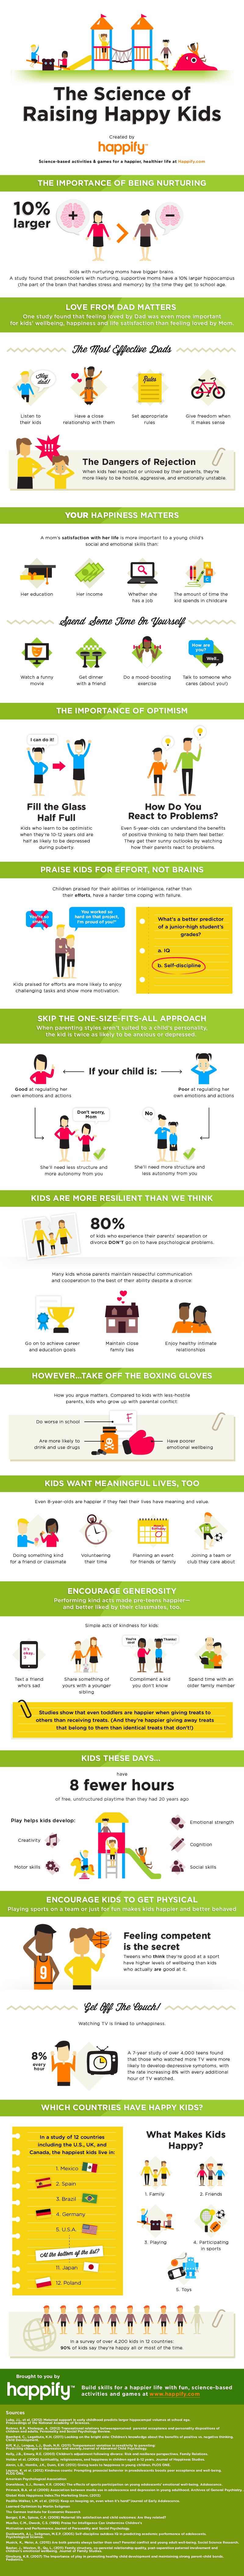 This Infographic Reveals How To Raise Happy And Healthy Kids